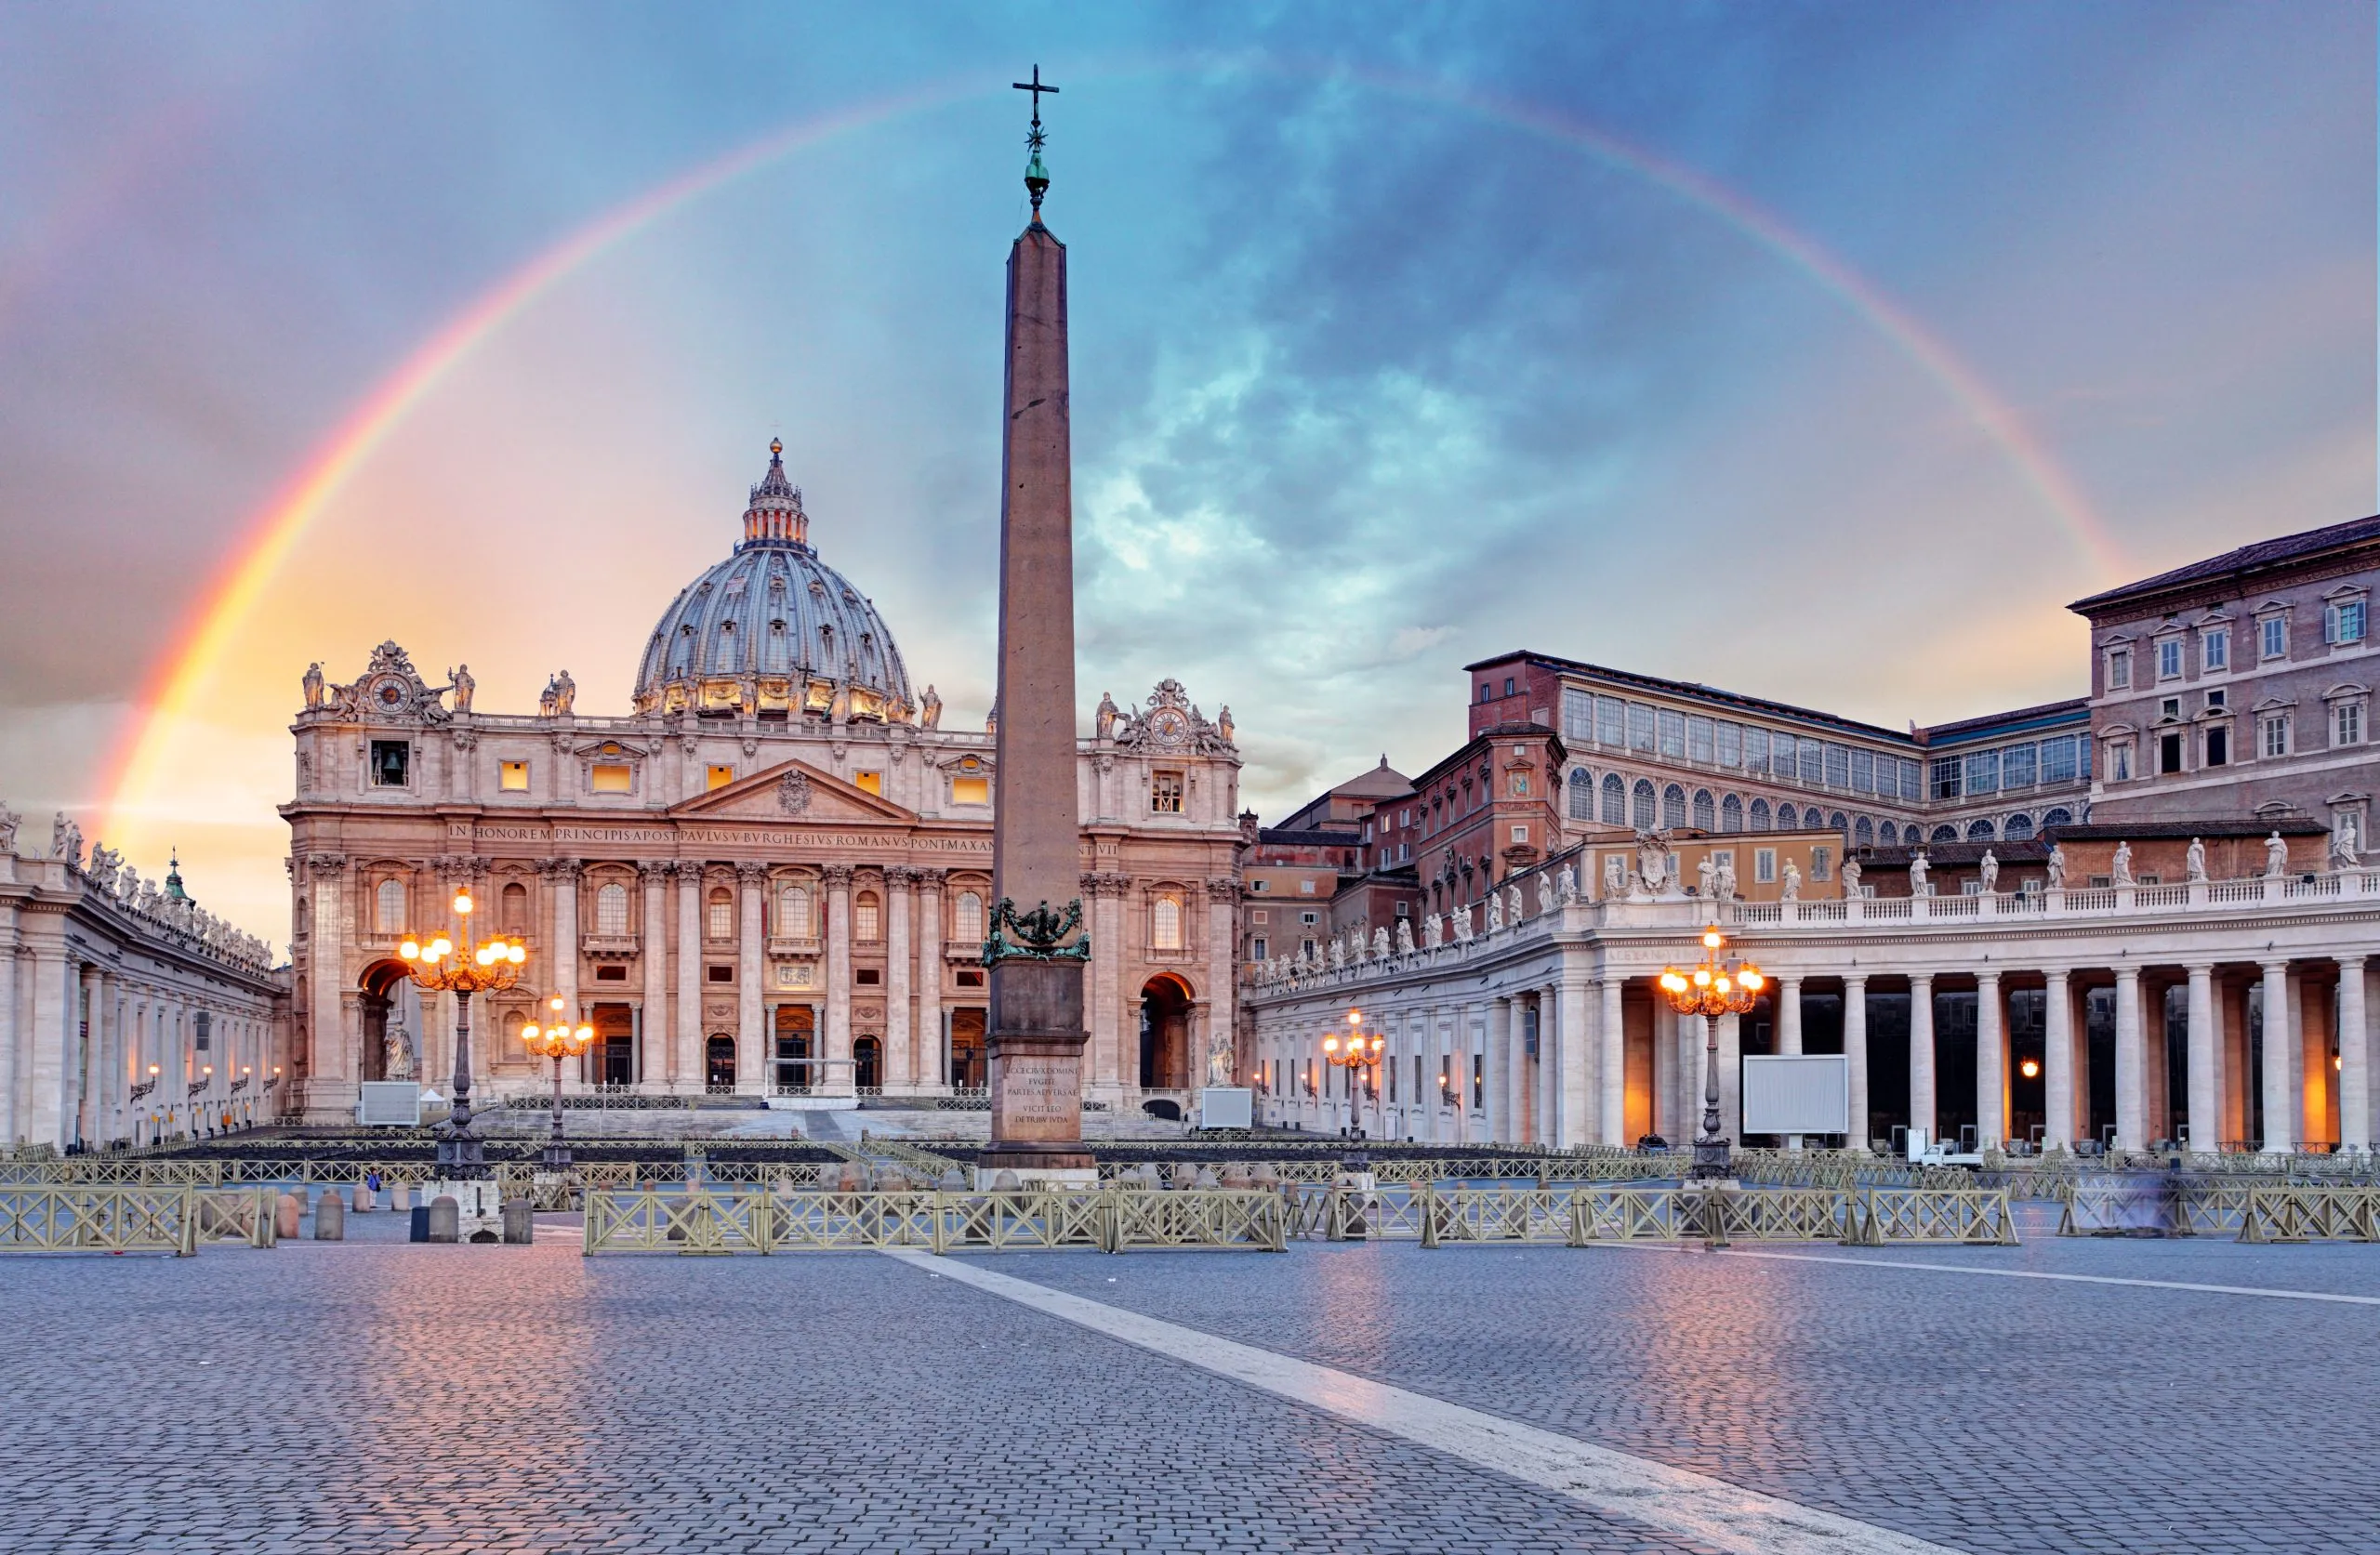 Vatican - Saint Peter's square with rainbow, Rome.